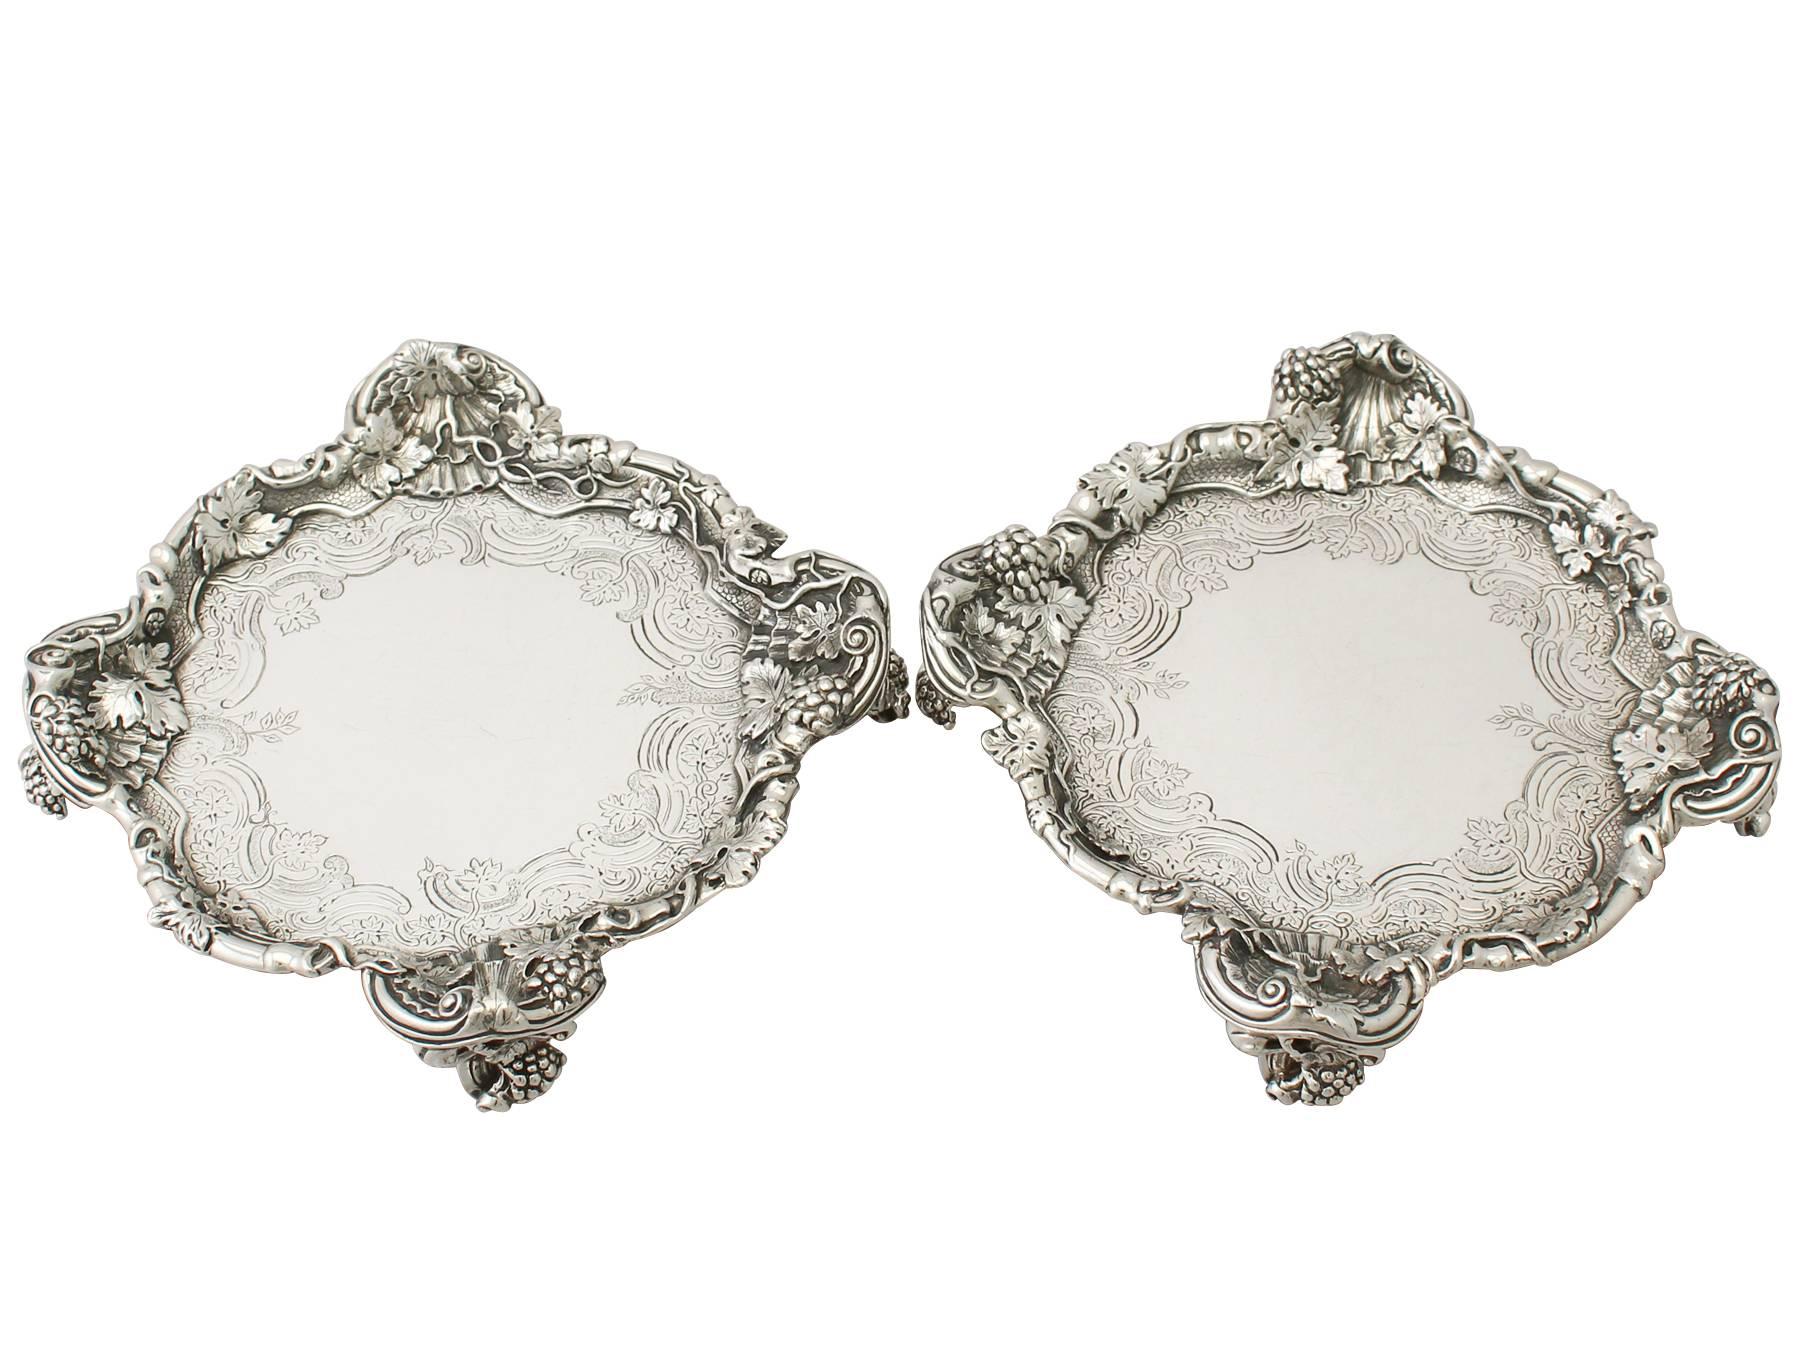 A magnificent, fine and impressive pair of antique Georgian English sterling silver salvers made in the Rococo style by Paul de Lamerie; an addition to our tray and salver collection.

These magnificent antique George II sterling silver salvers